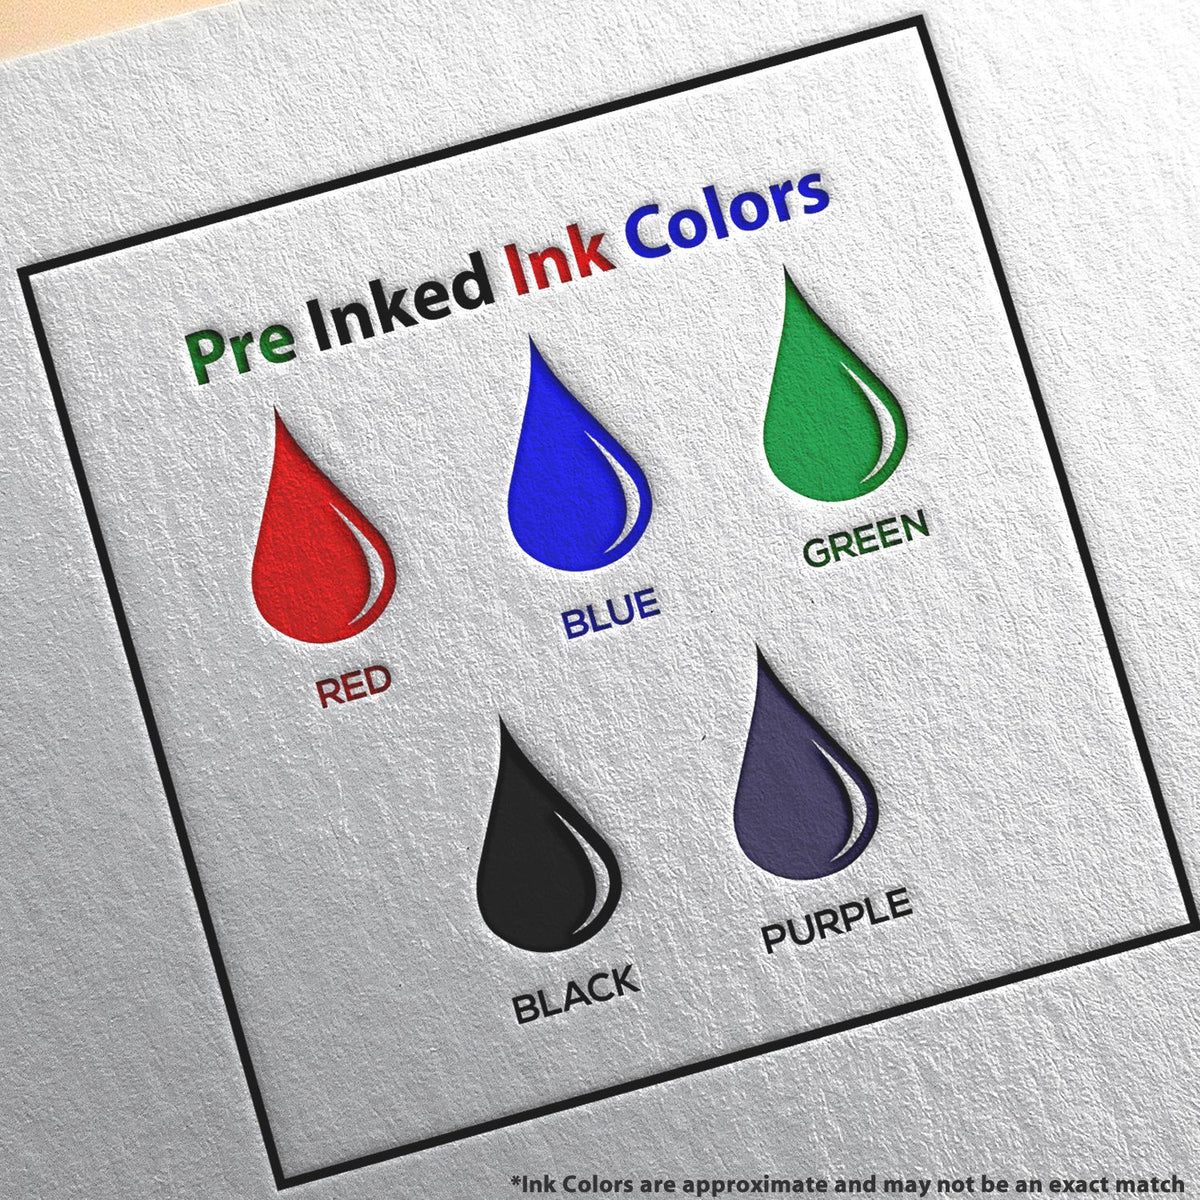 A picture showing the different ink colors or hues available for the MaxLight Premium Pre-Inked North Dakota Rectangular Notarial Stamp product.